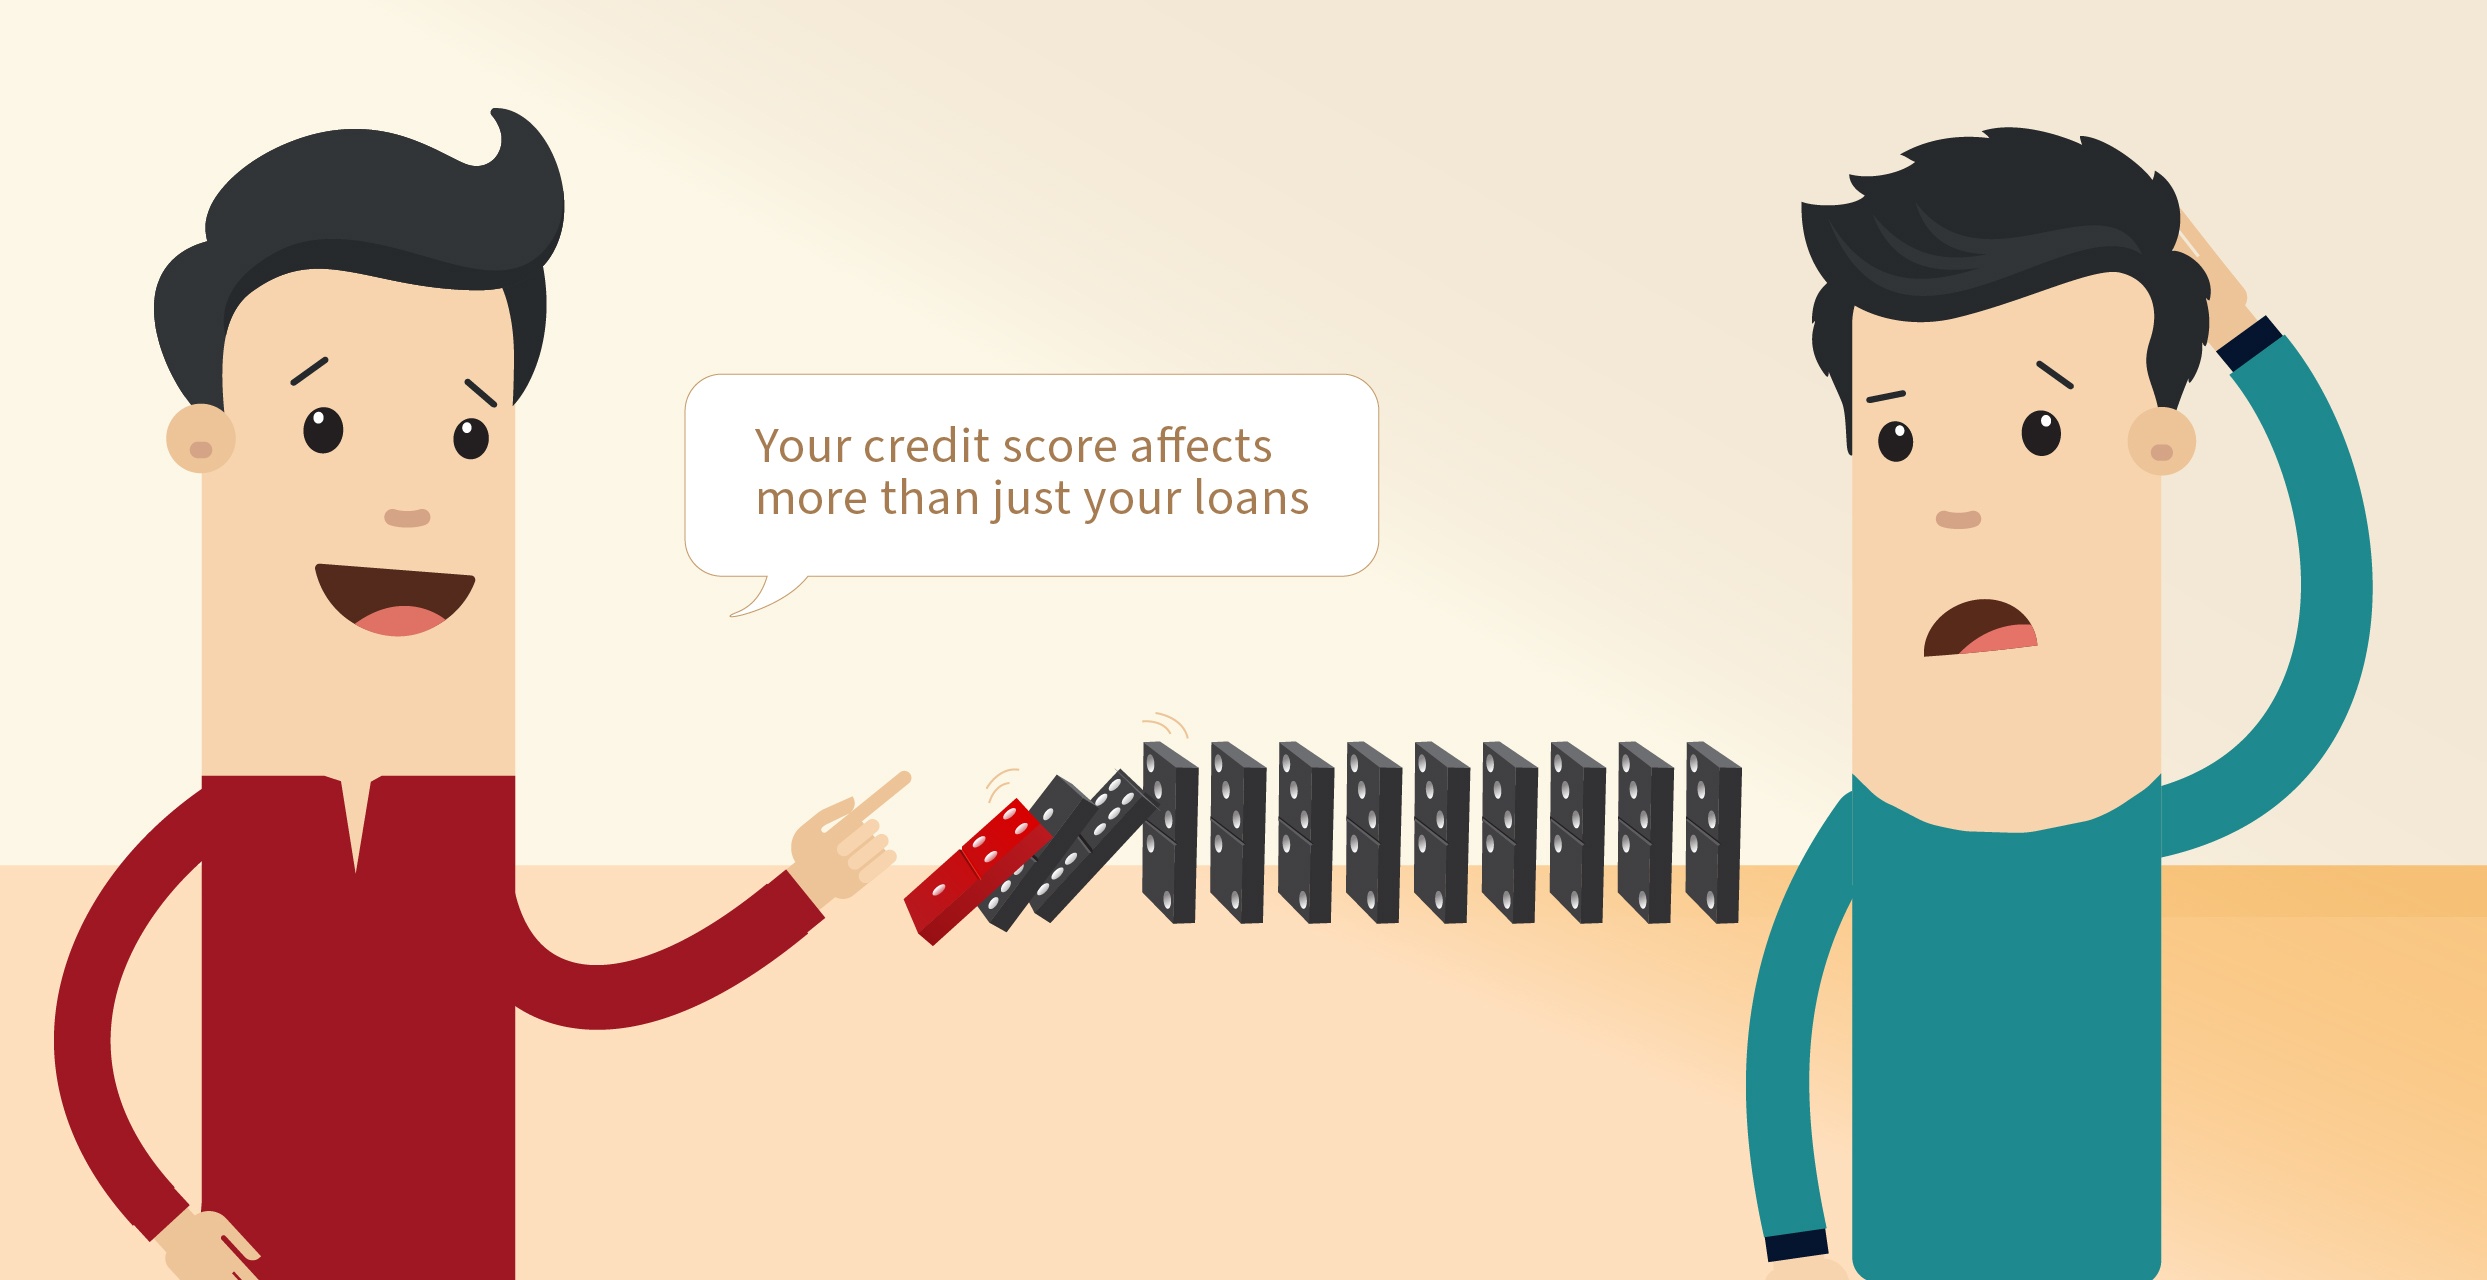 Did you know your credit score doesn't just impact your borrowings but your job prospects as well